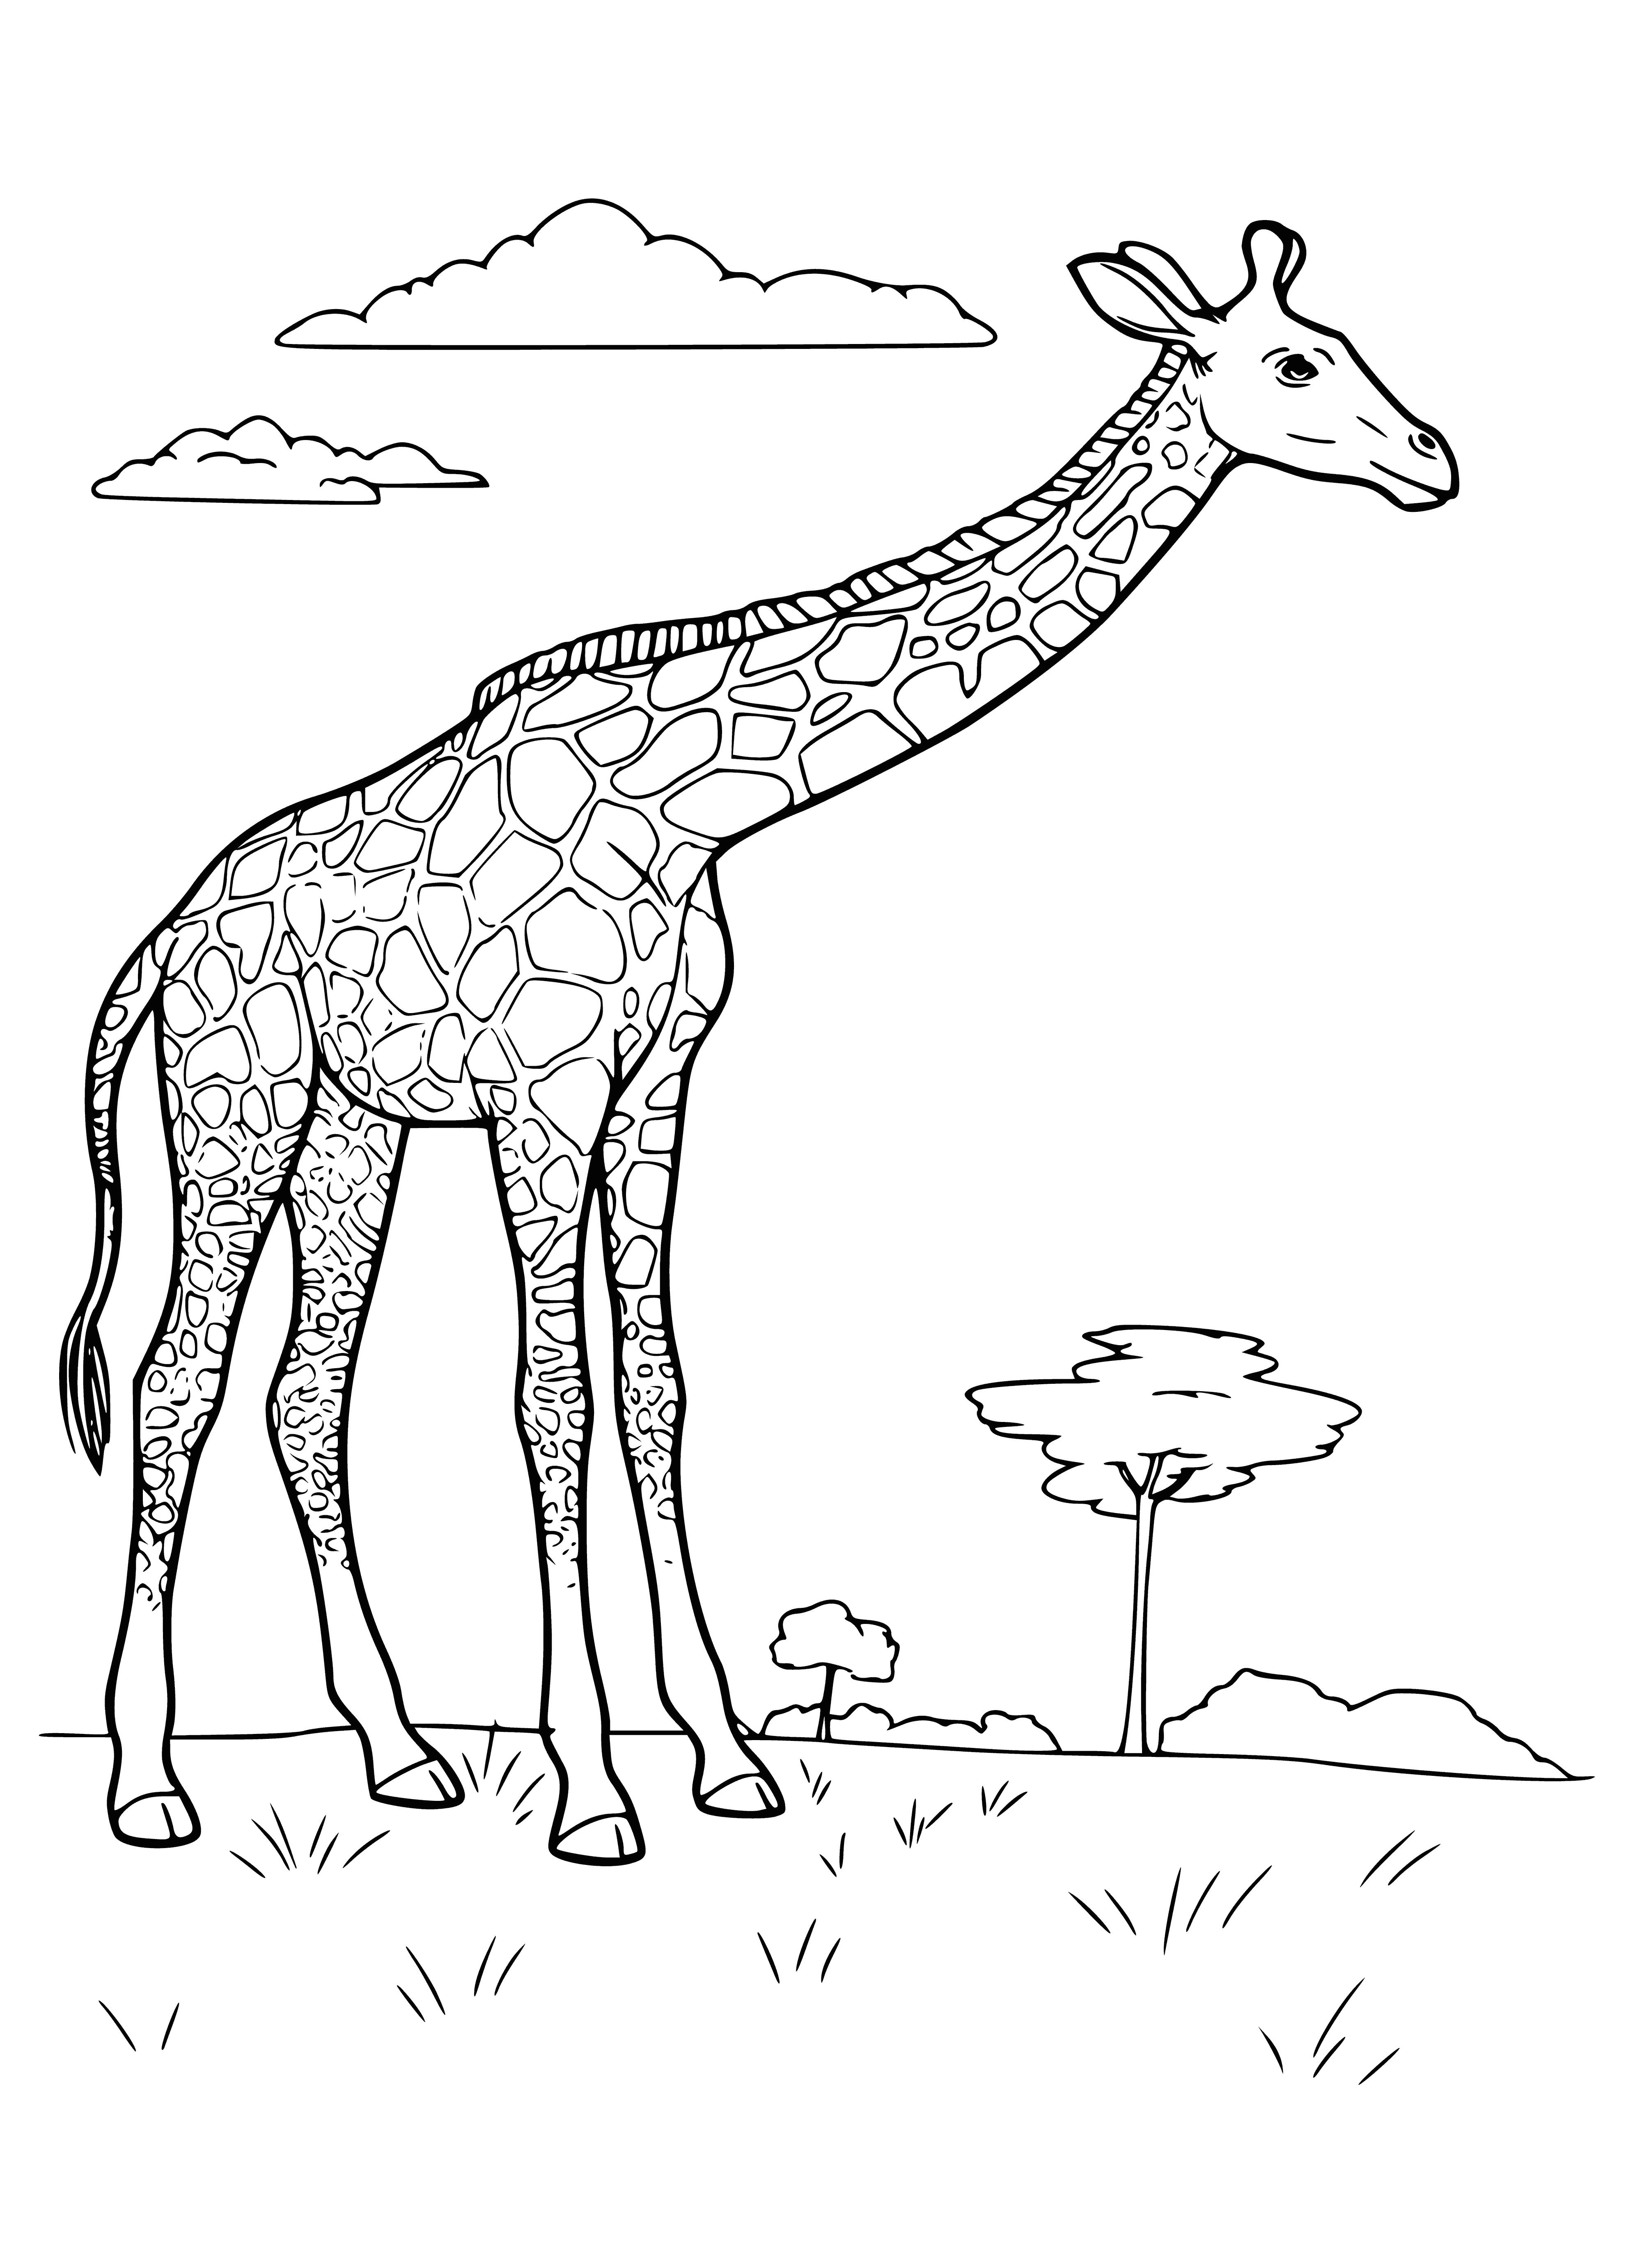 coloring page: Giraffes live in woodlands, bushlands, savannahs, and mountains; sometimes in reserves, but can be a pest to agriculture.